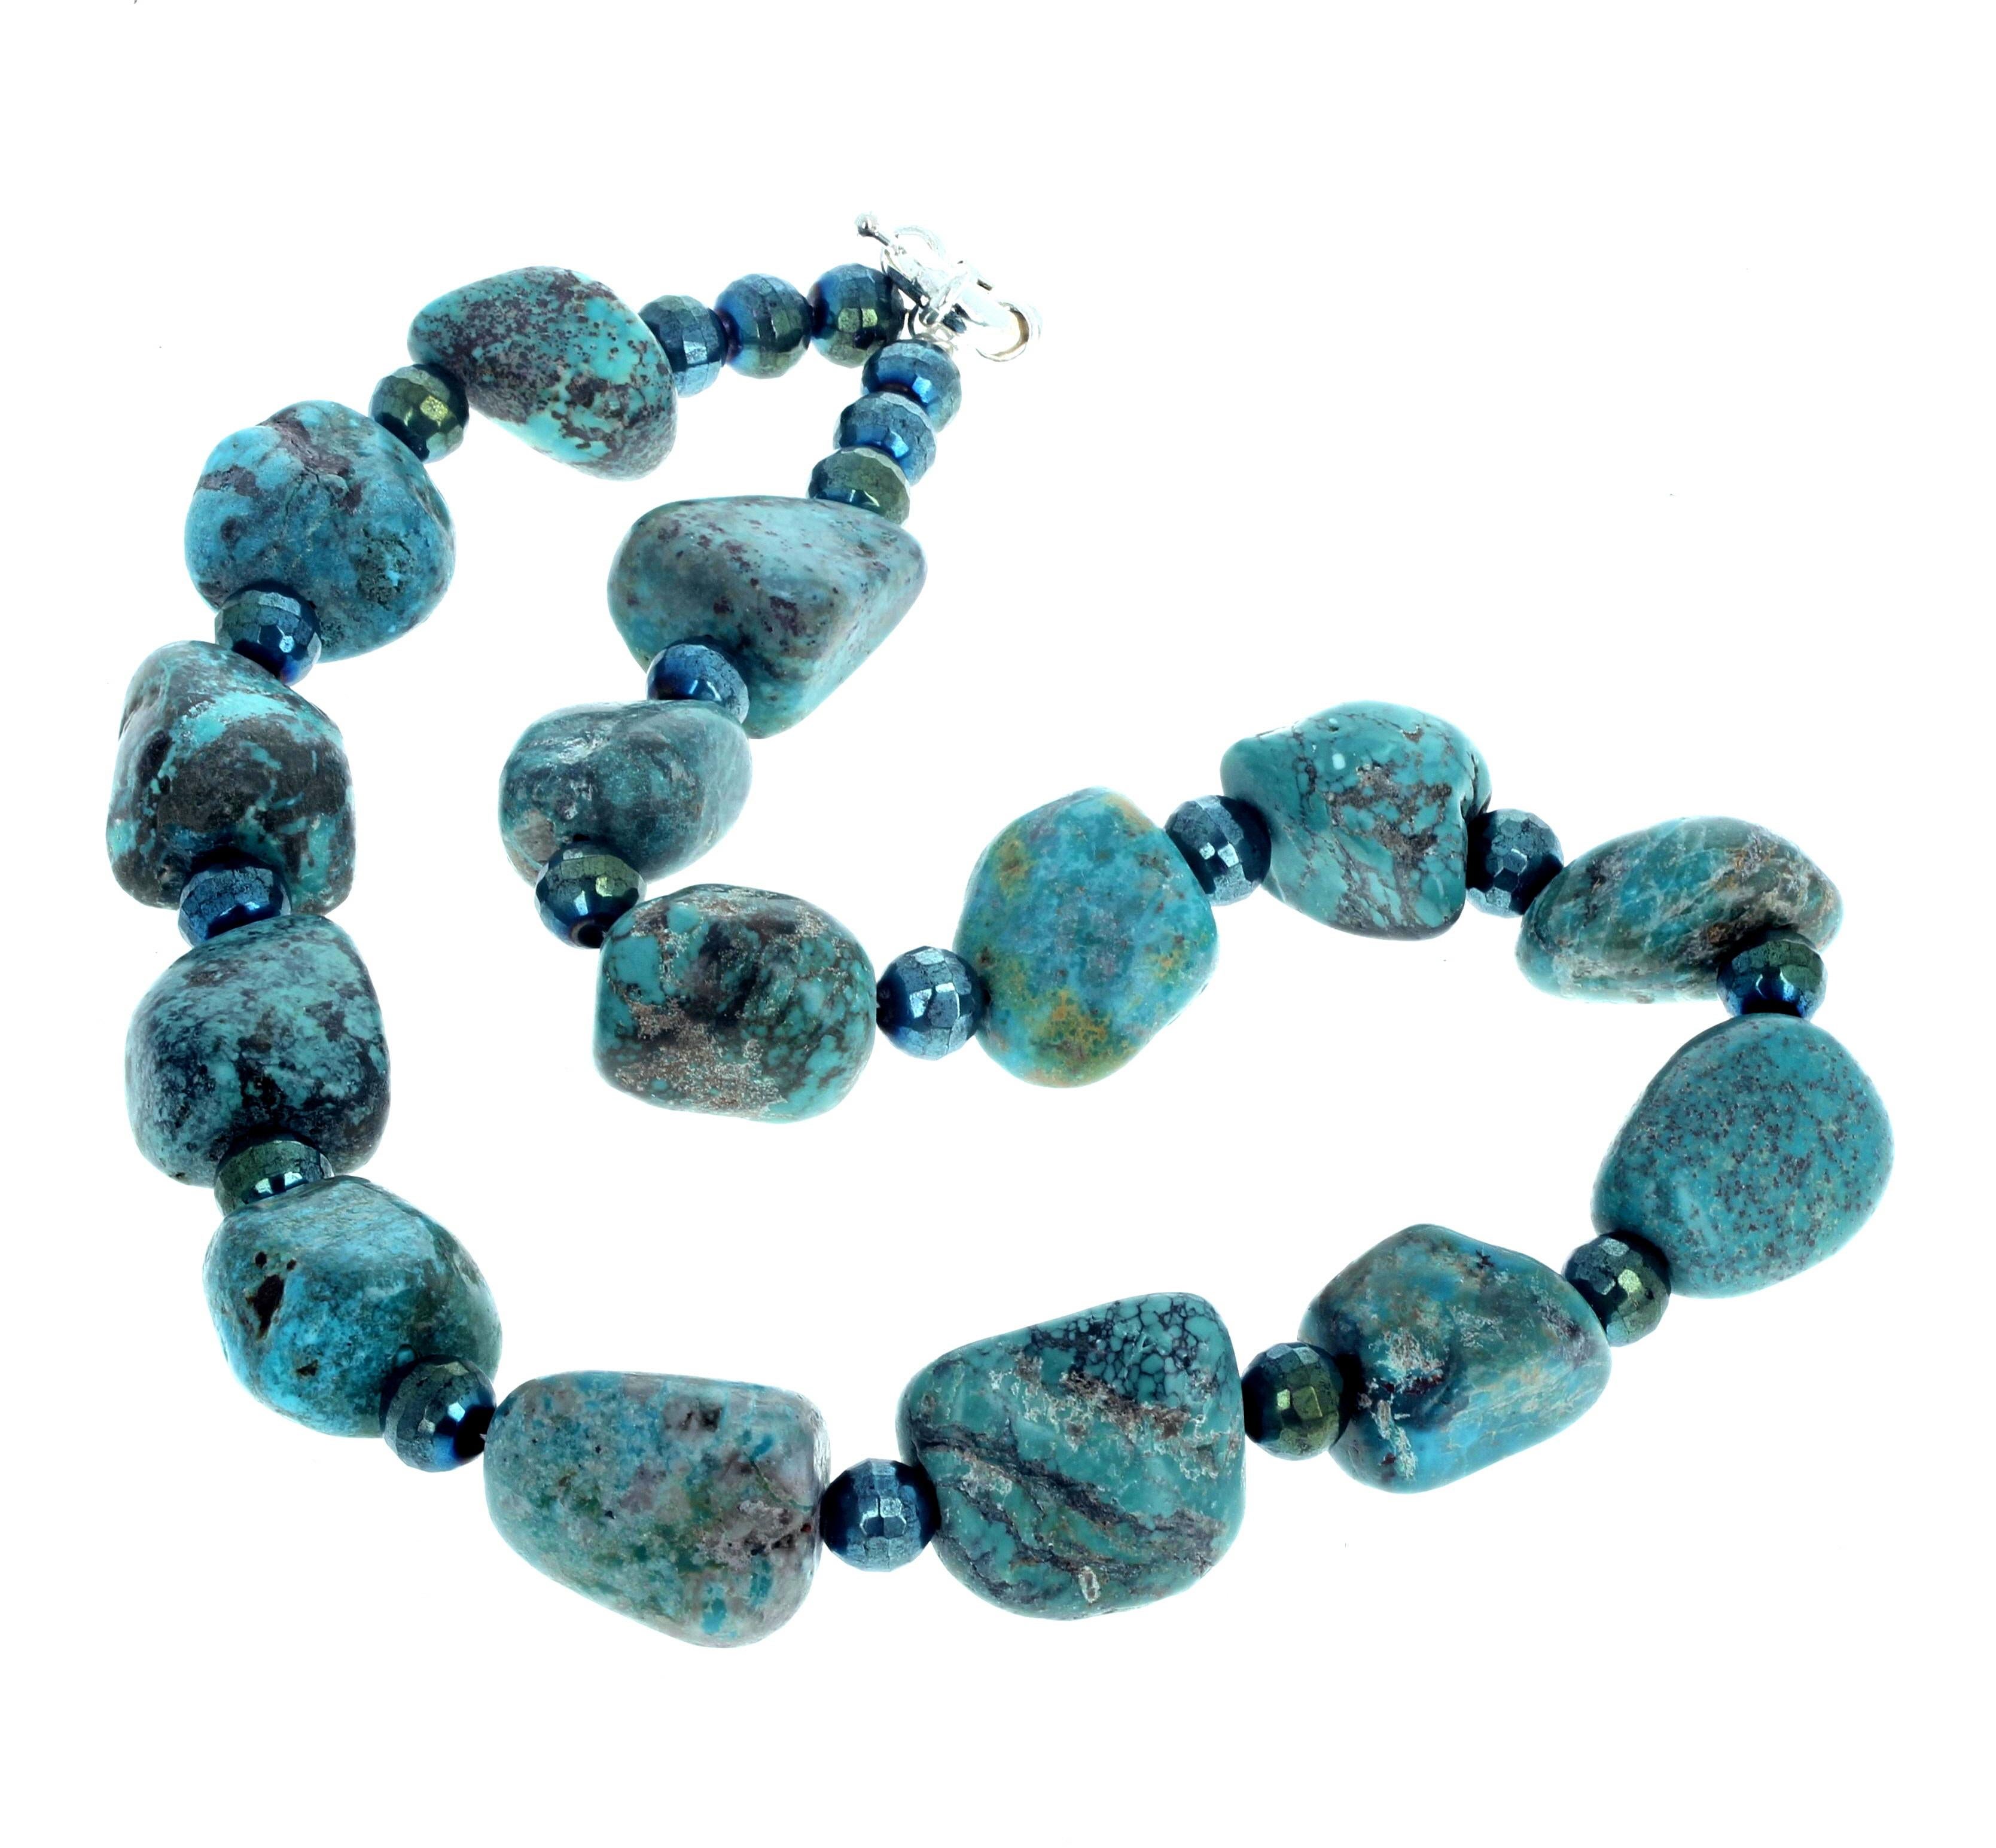 This fascinating chunky polished real natural Turquoises are enhanced with round highly polished Azurite-Malachite rondels in the 19 inch long necklace.  The easy to use clasp is round and is silver.  